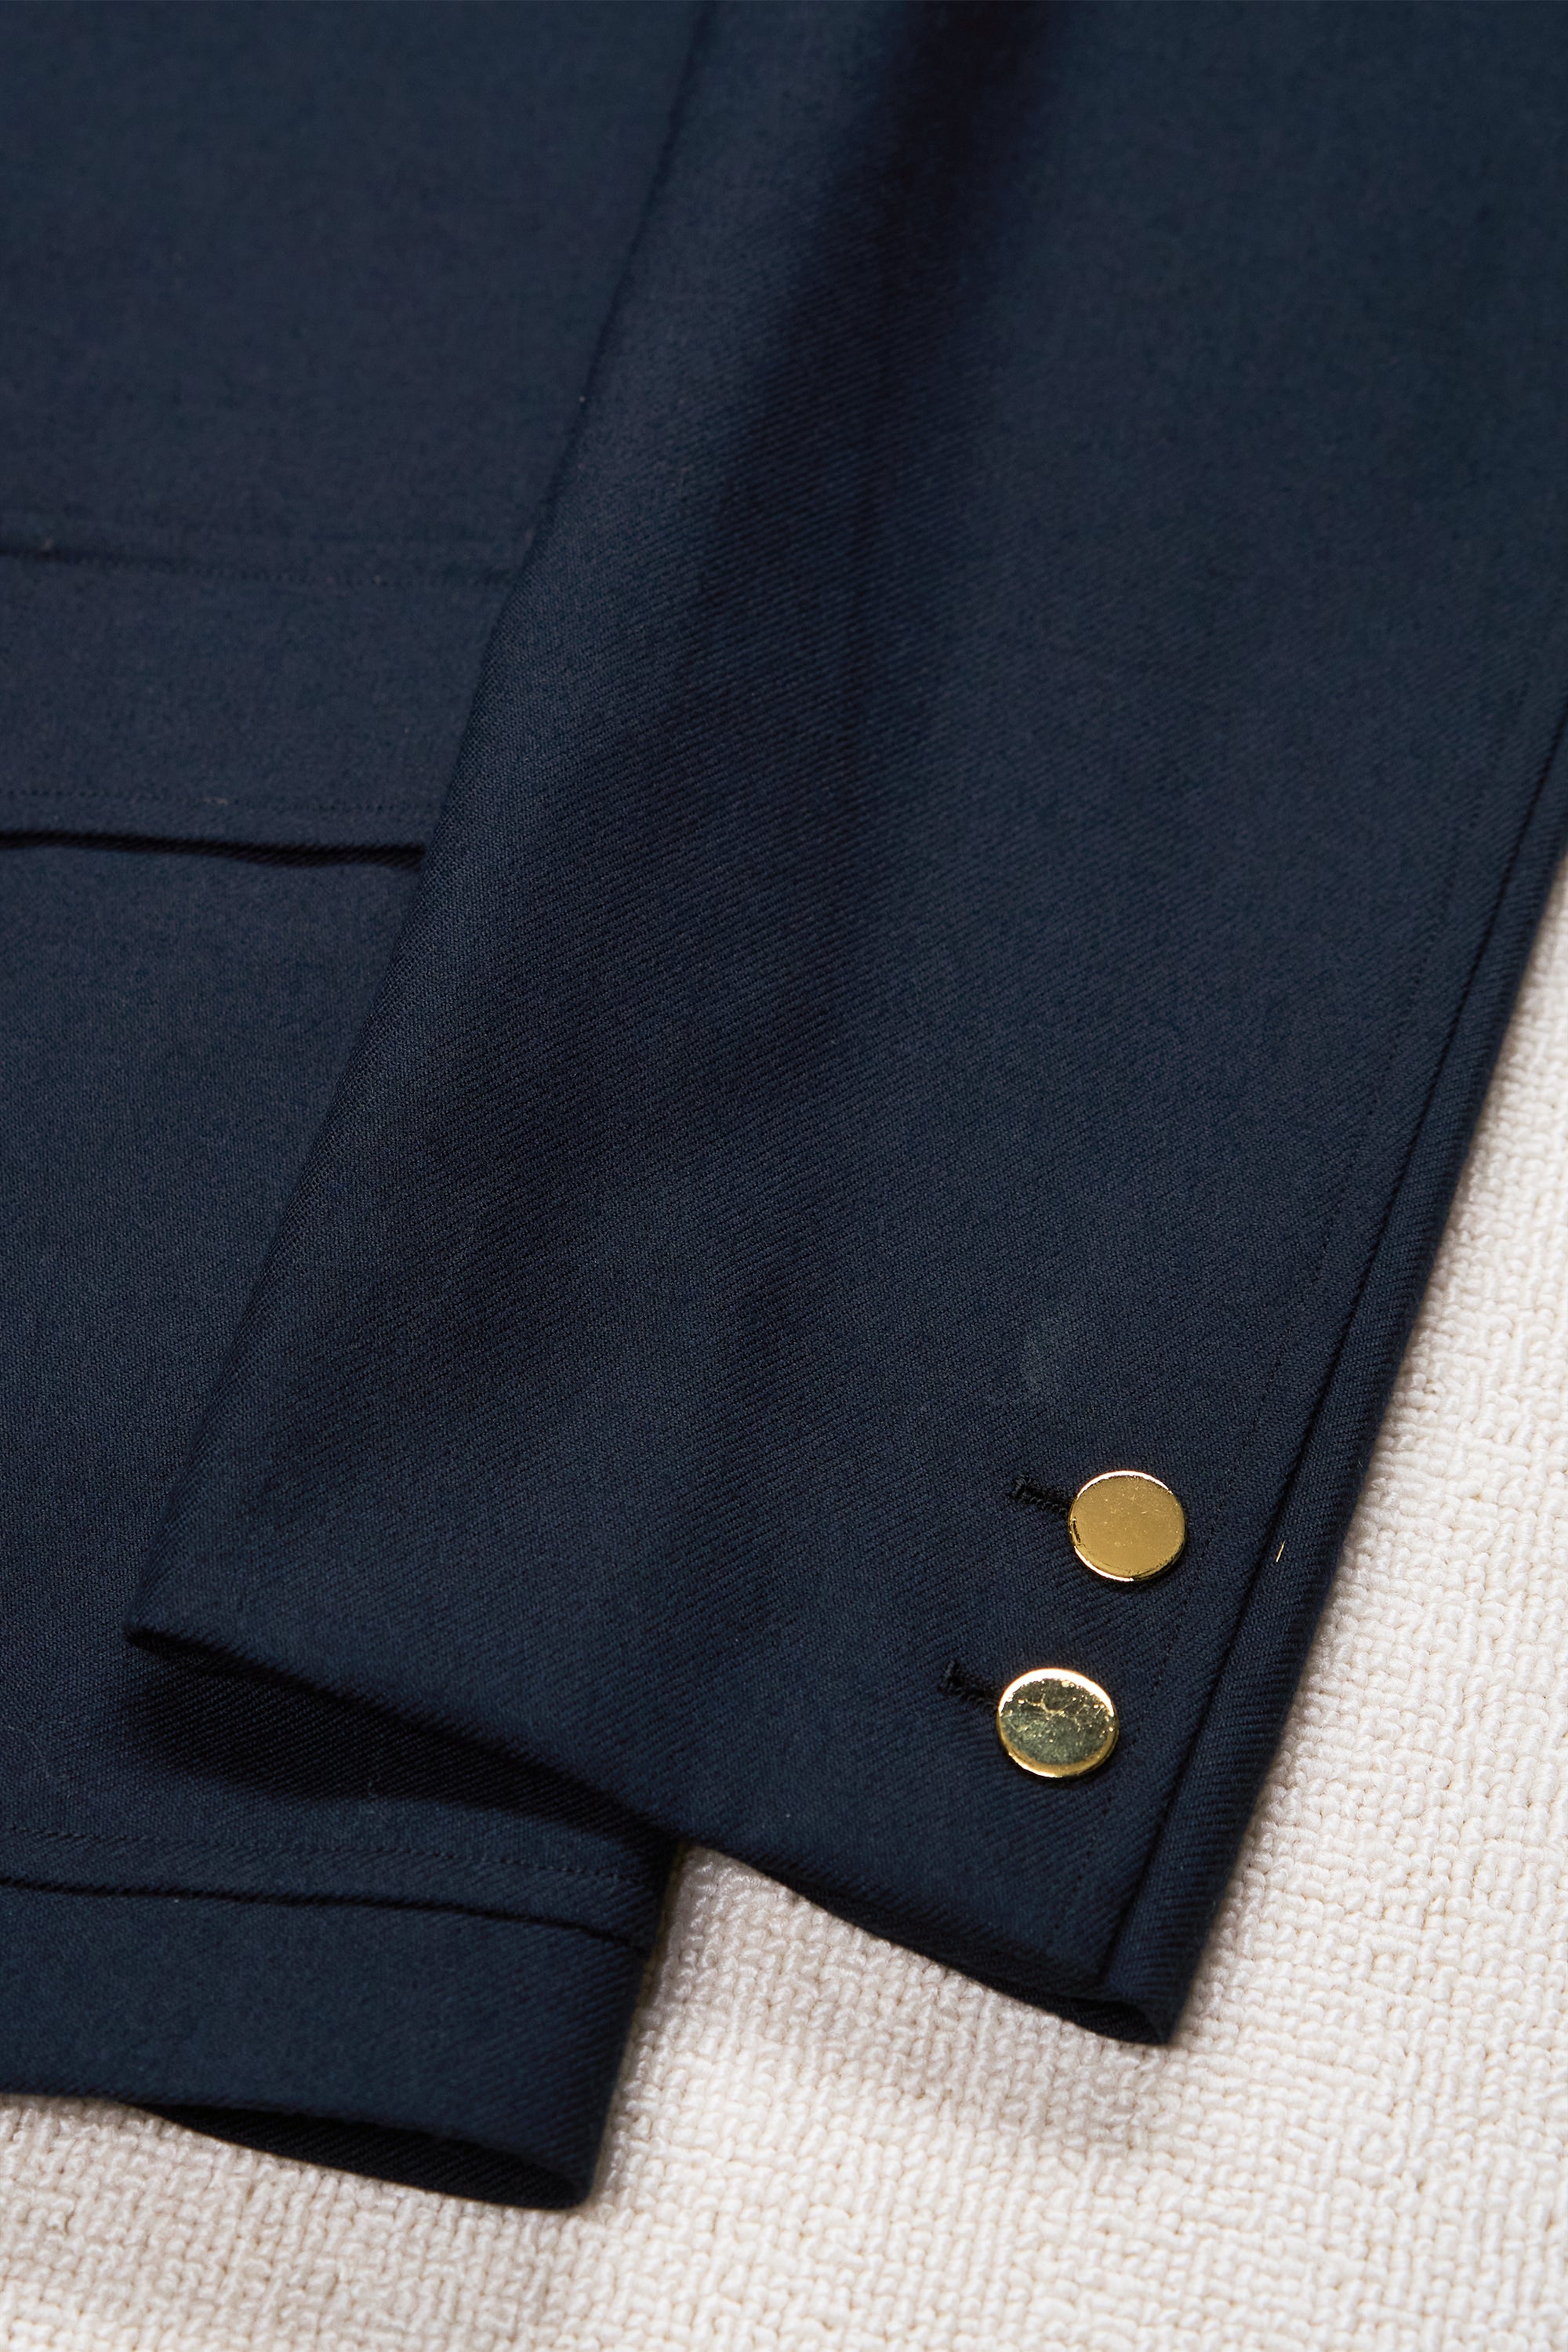 Tailor Caid Navy Wool Sport Coat